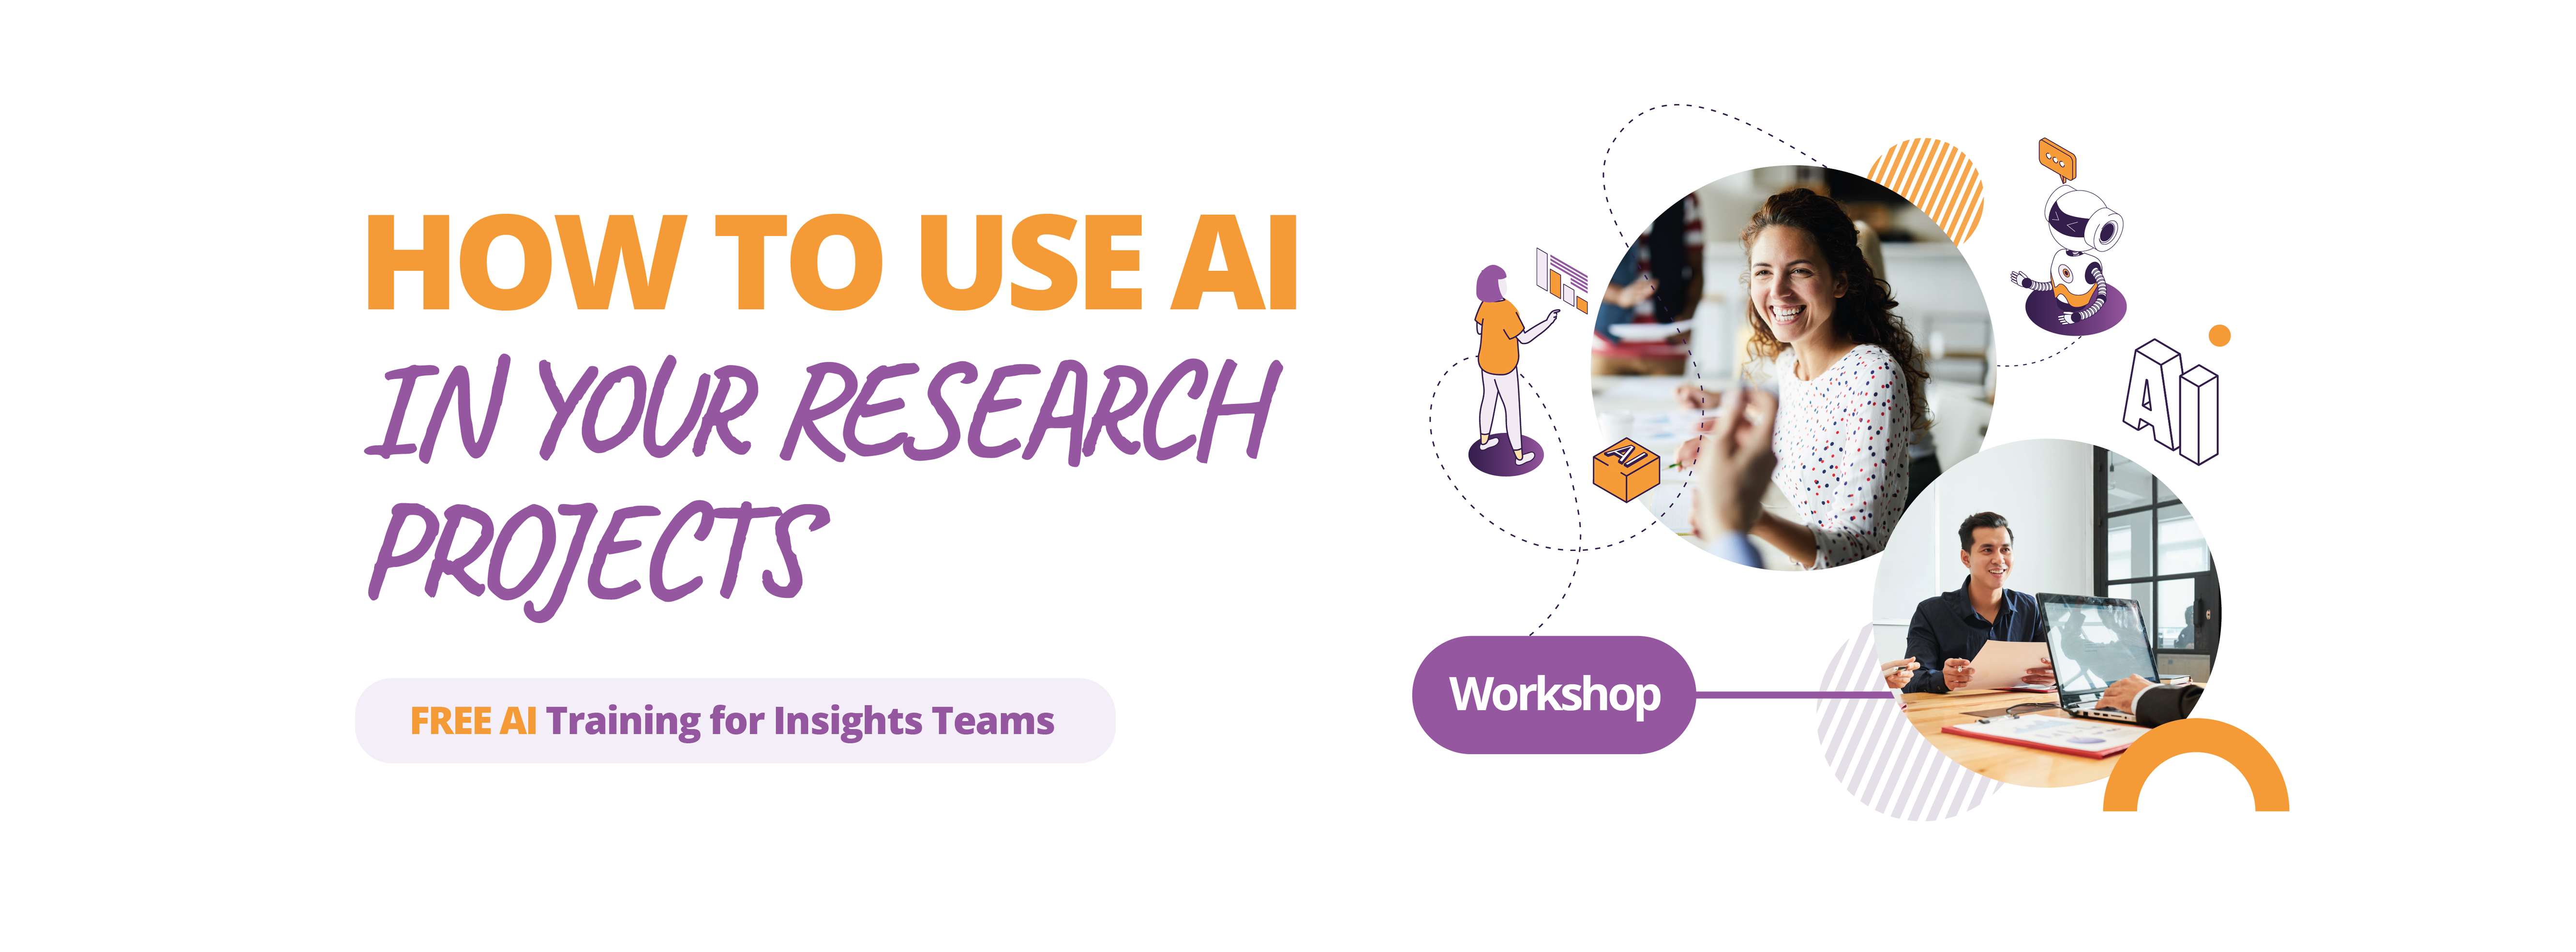 Learn how to leverage an insights platform in your research projects using AI technology.